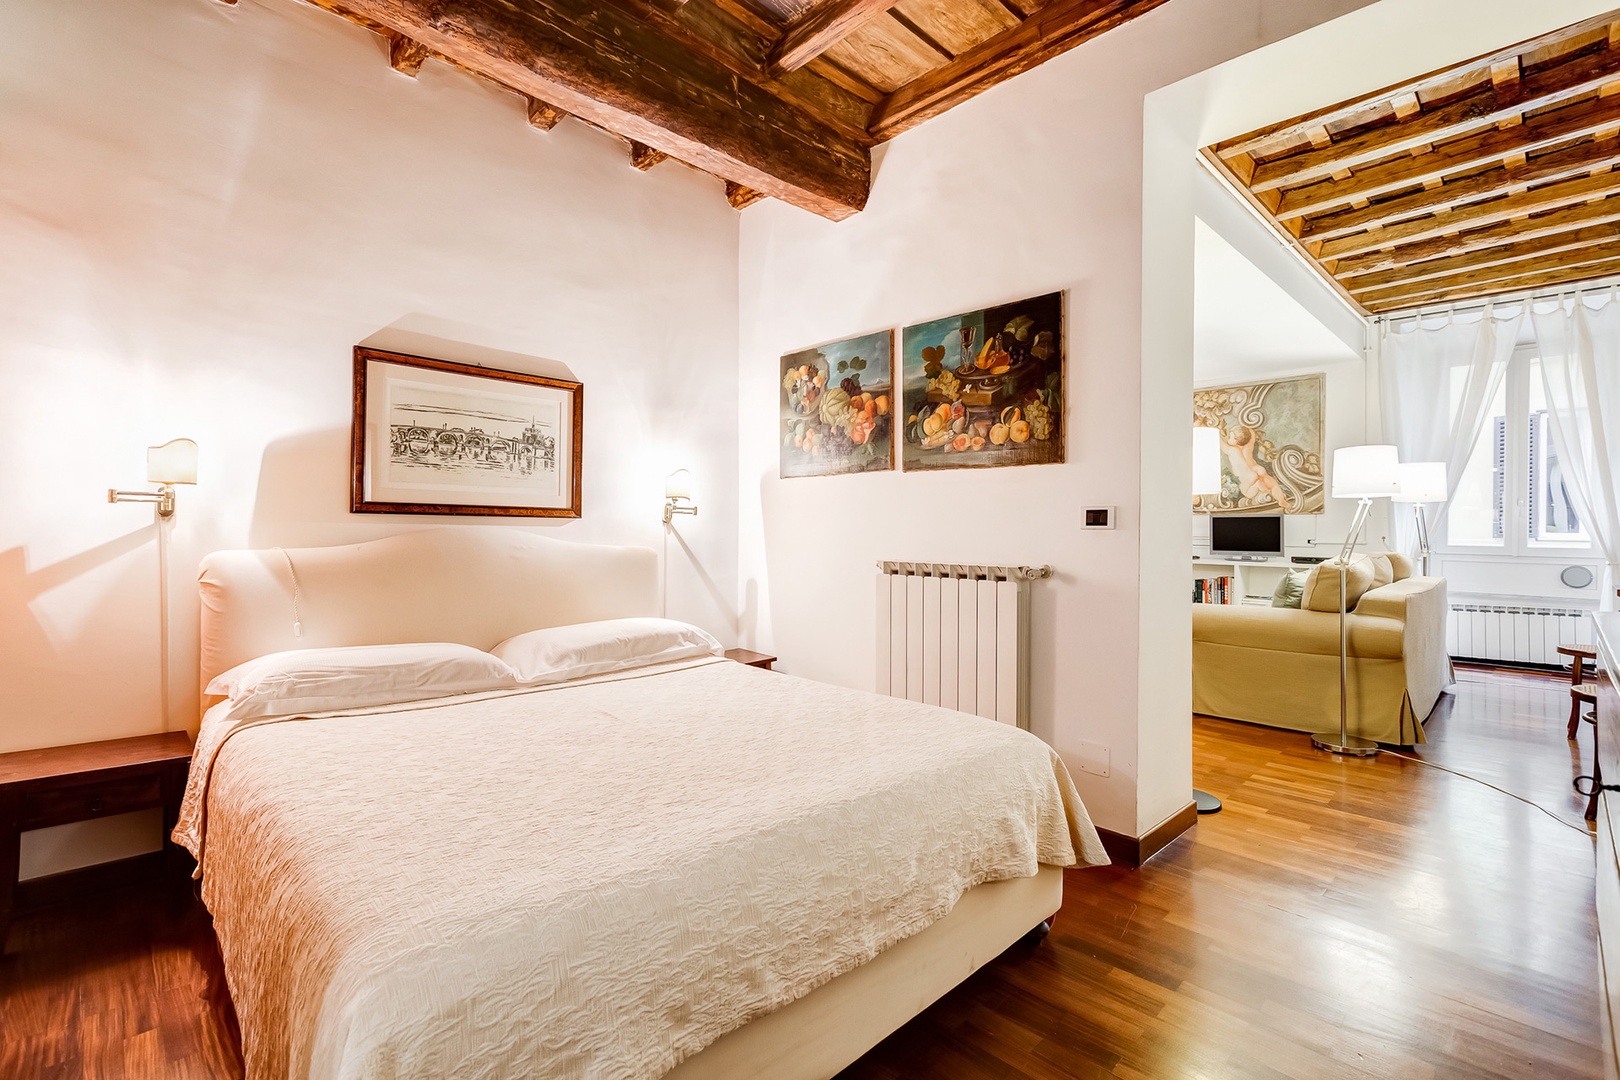 Comfortable bed with an etching of the Bridge of Angels over the Tiber river above it.